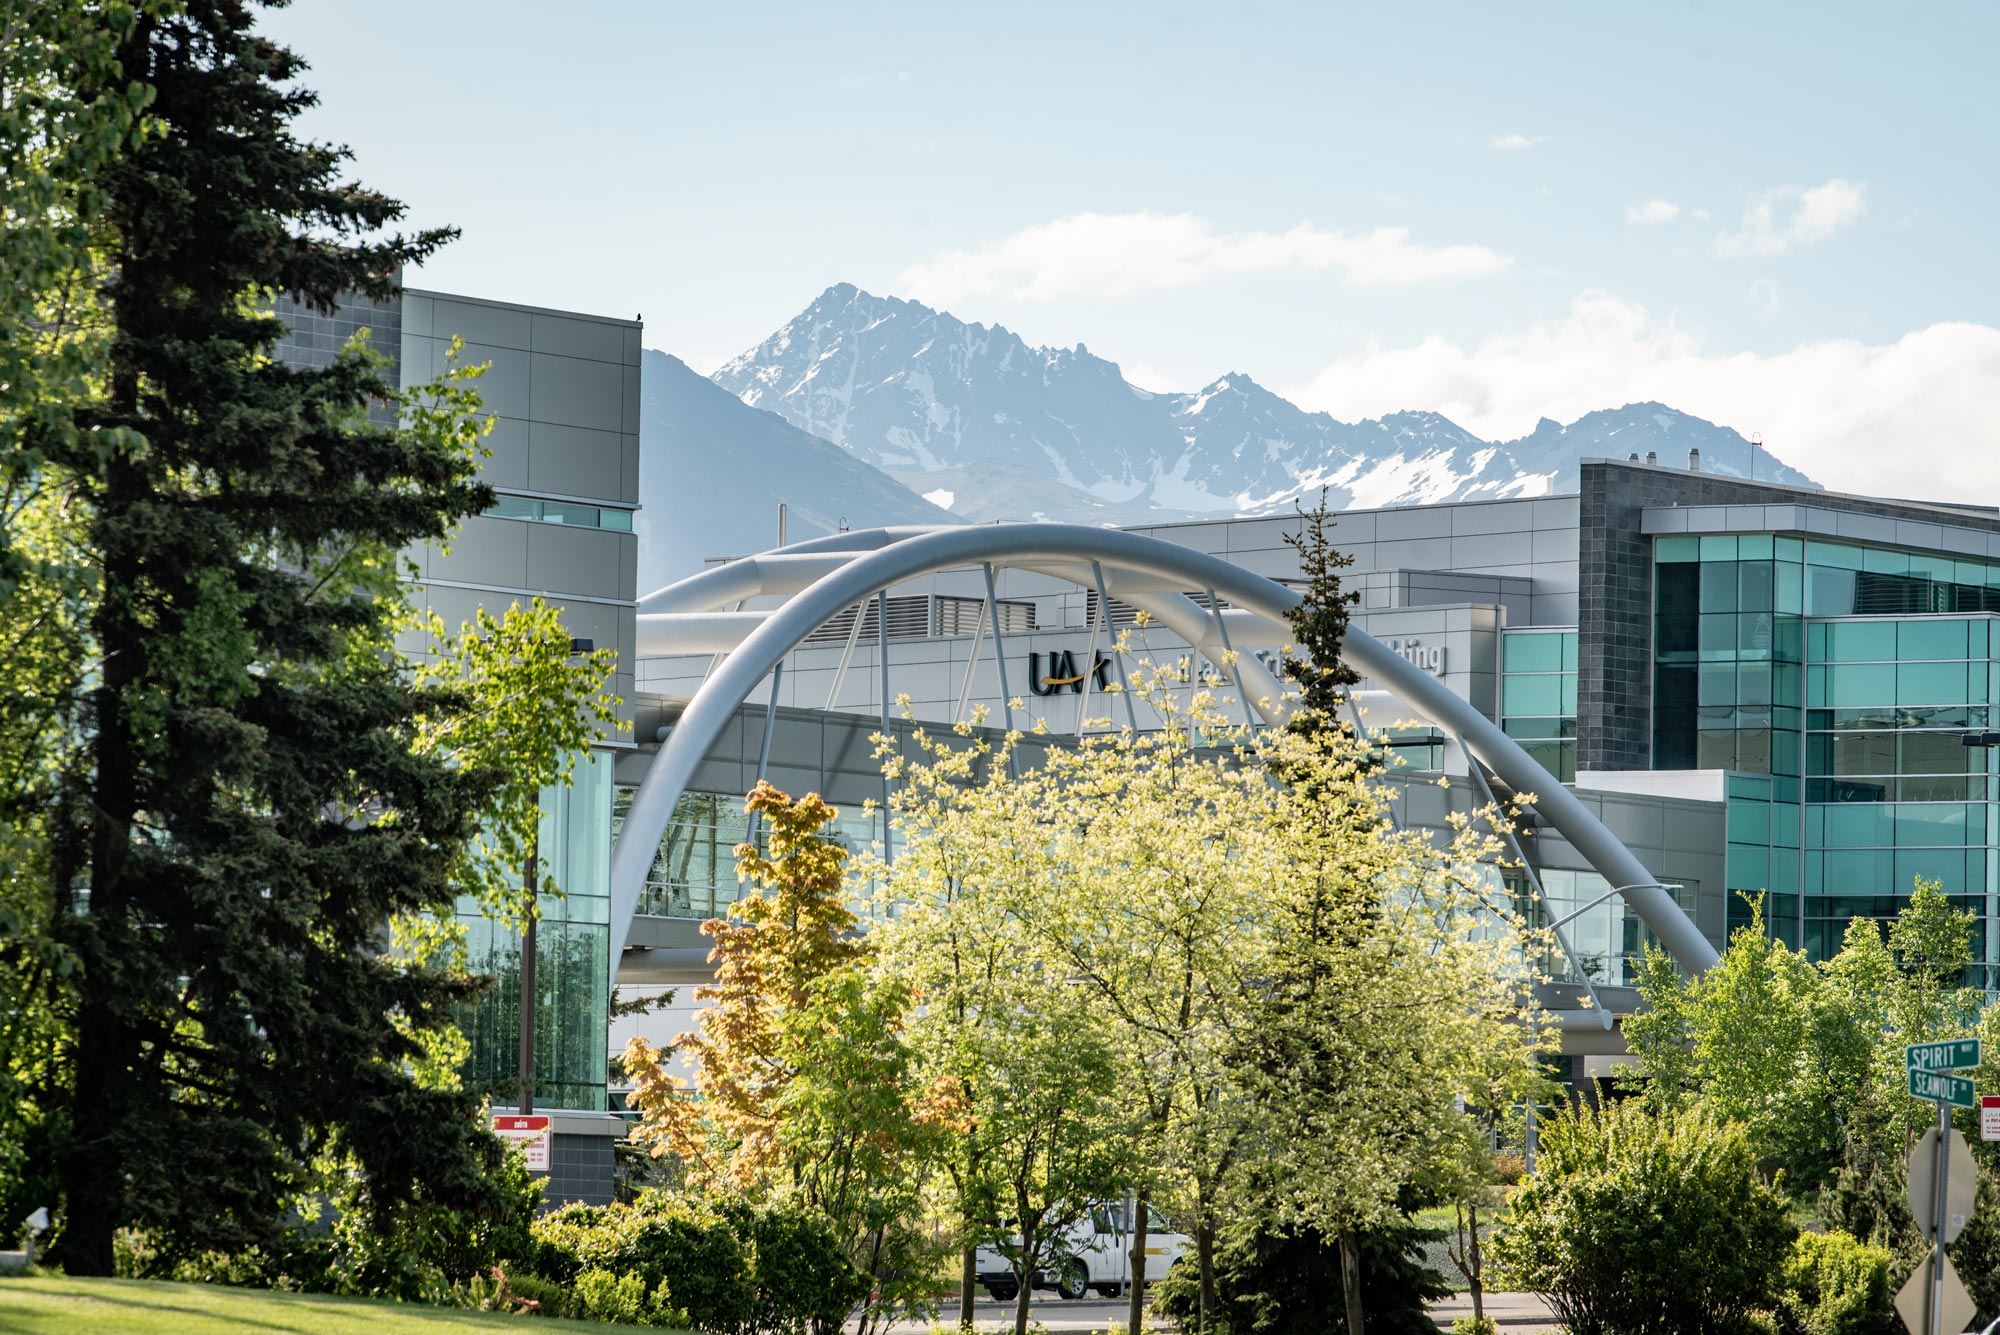 UAA's Engineering and Industry Building, Parrish Bridge, and Health Sciences Building (Photo by James Evans, UAA)